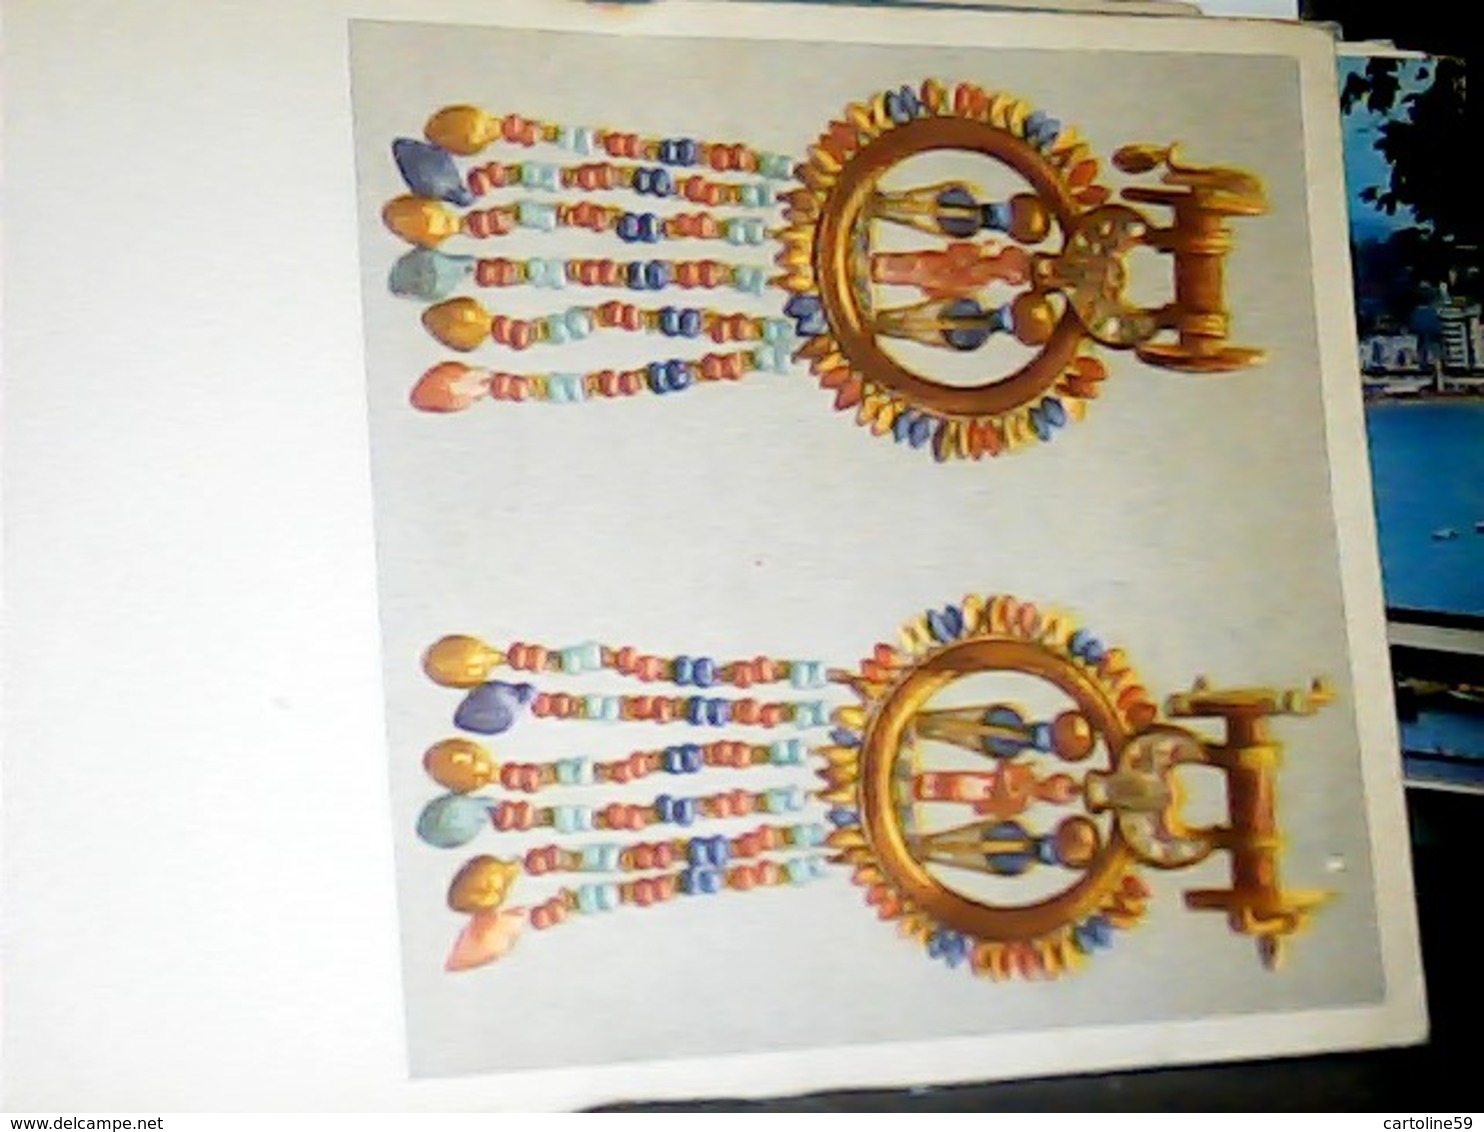 TUT ANK AMEN'S TREASURES - 12 - EAR ORNAMENTS - IN THE CENTRE OF A ROUND GOLD PLAQUE STANDS THE KING  VB1966 HK4655 - Musei